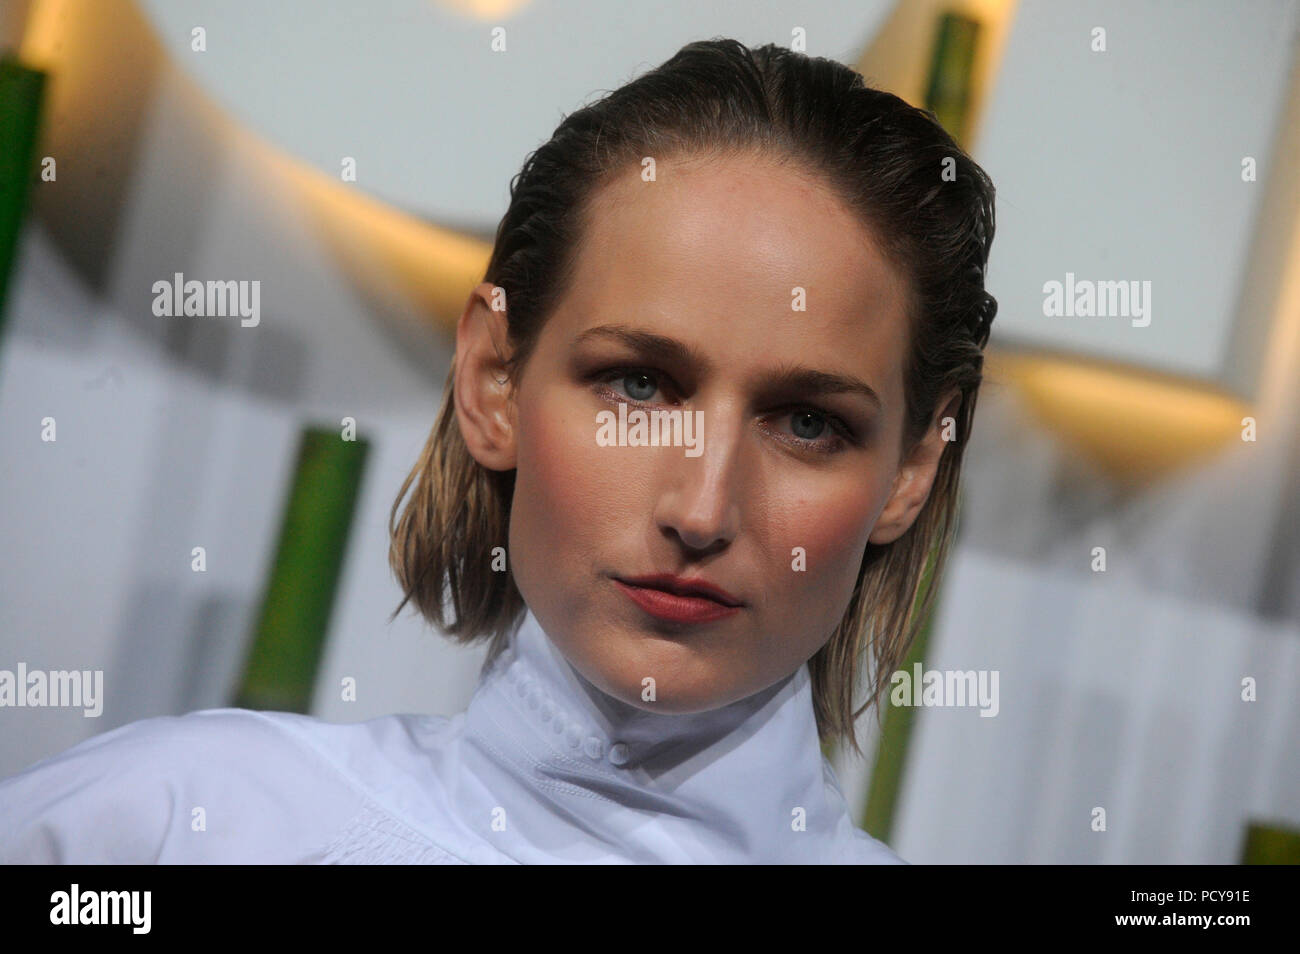 NEW YORK, NY - JUNE 02: Leelee Sobieski attends the 2015 Museum of Modern Art Party In The Garden and special salute to David Rockefeller on his 100th Birthday at Museum of Modern Art on June 2, 2015 in New York City   People:  Leelee Sobieski Stock Photo